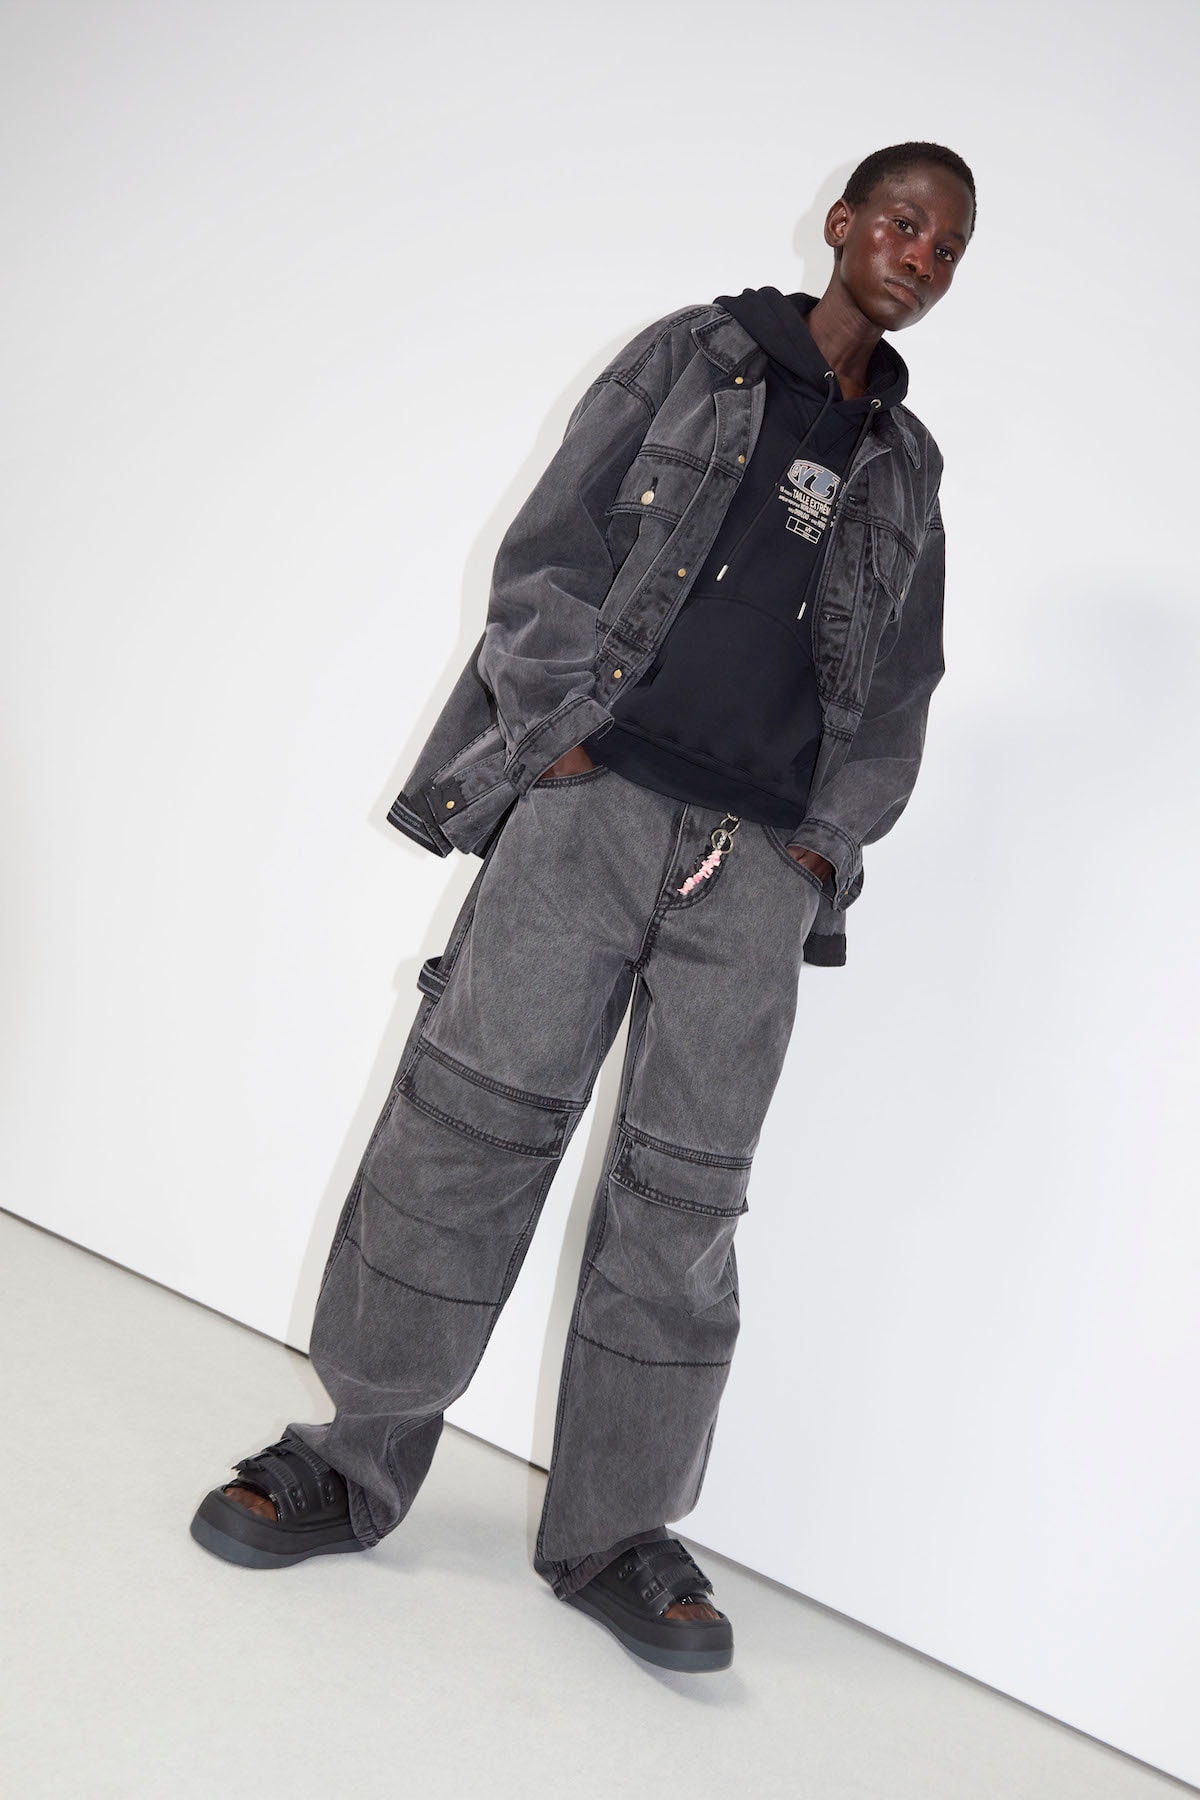 Eytys Spring/Summer 2020 Collection Lookbook Release Sneaker Angel Shoe Chunky Cowboy Boot Retro Inspired Denim Leather Jacket